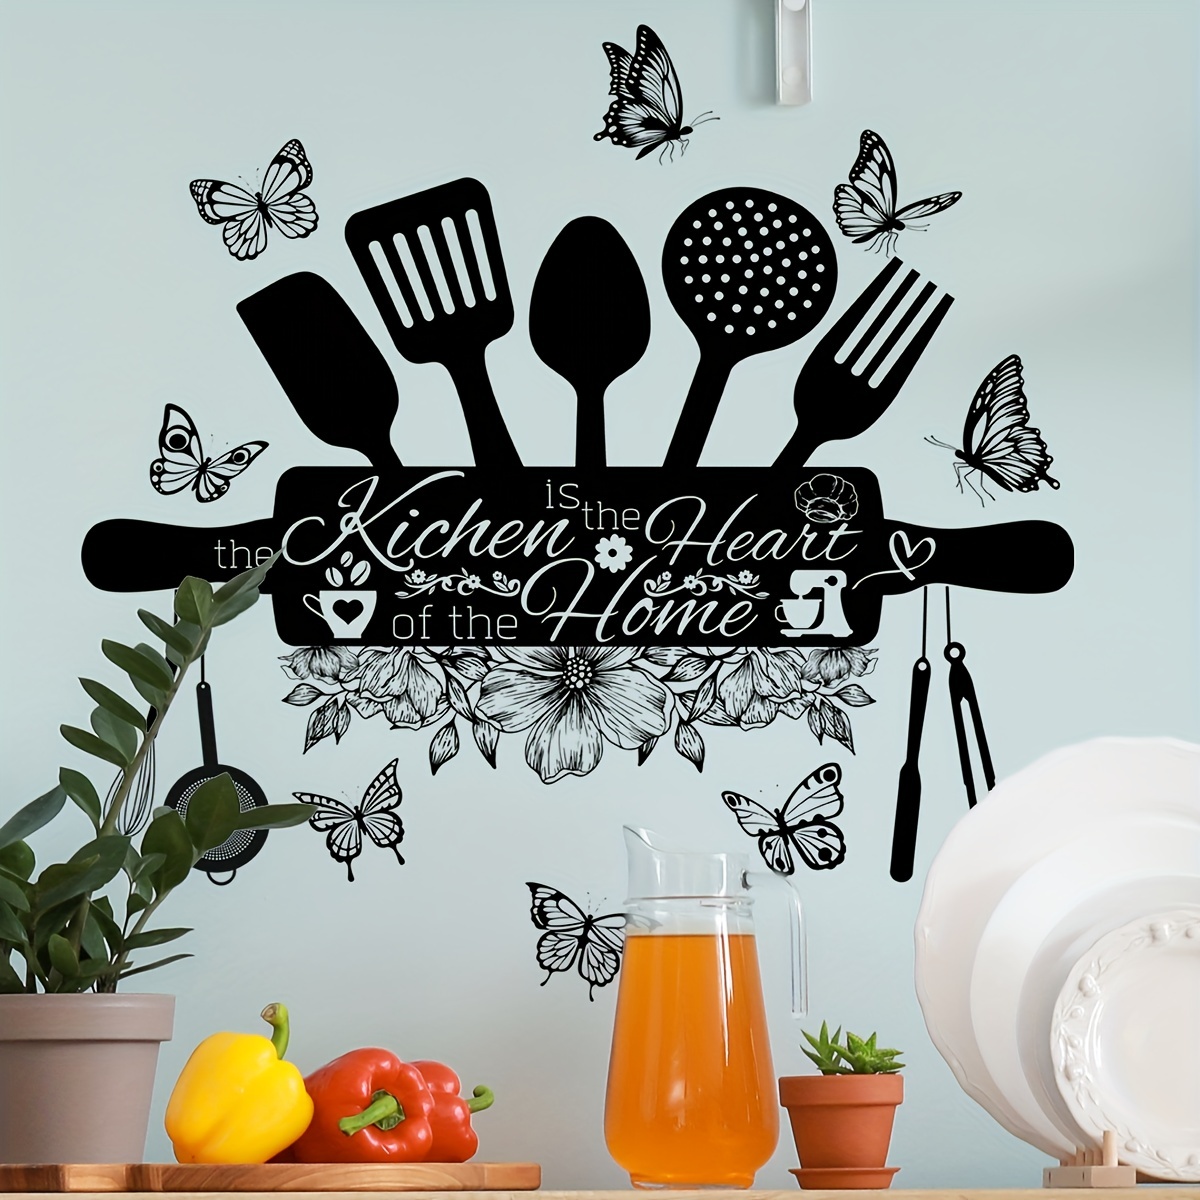 

1pc Kitchen Utensils Wall Decal With Inspirational Quote, Plastic, Removable Self-adhesive Wall Sticker, Kitchen Decor, Black And White With Butterfly Accents